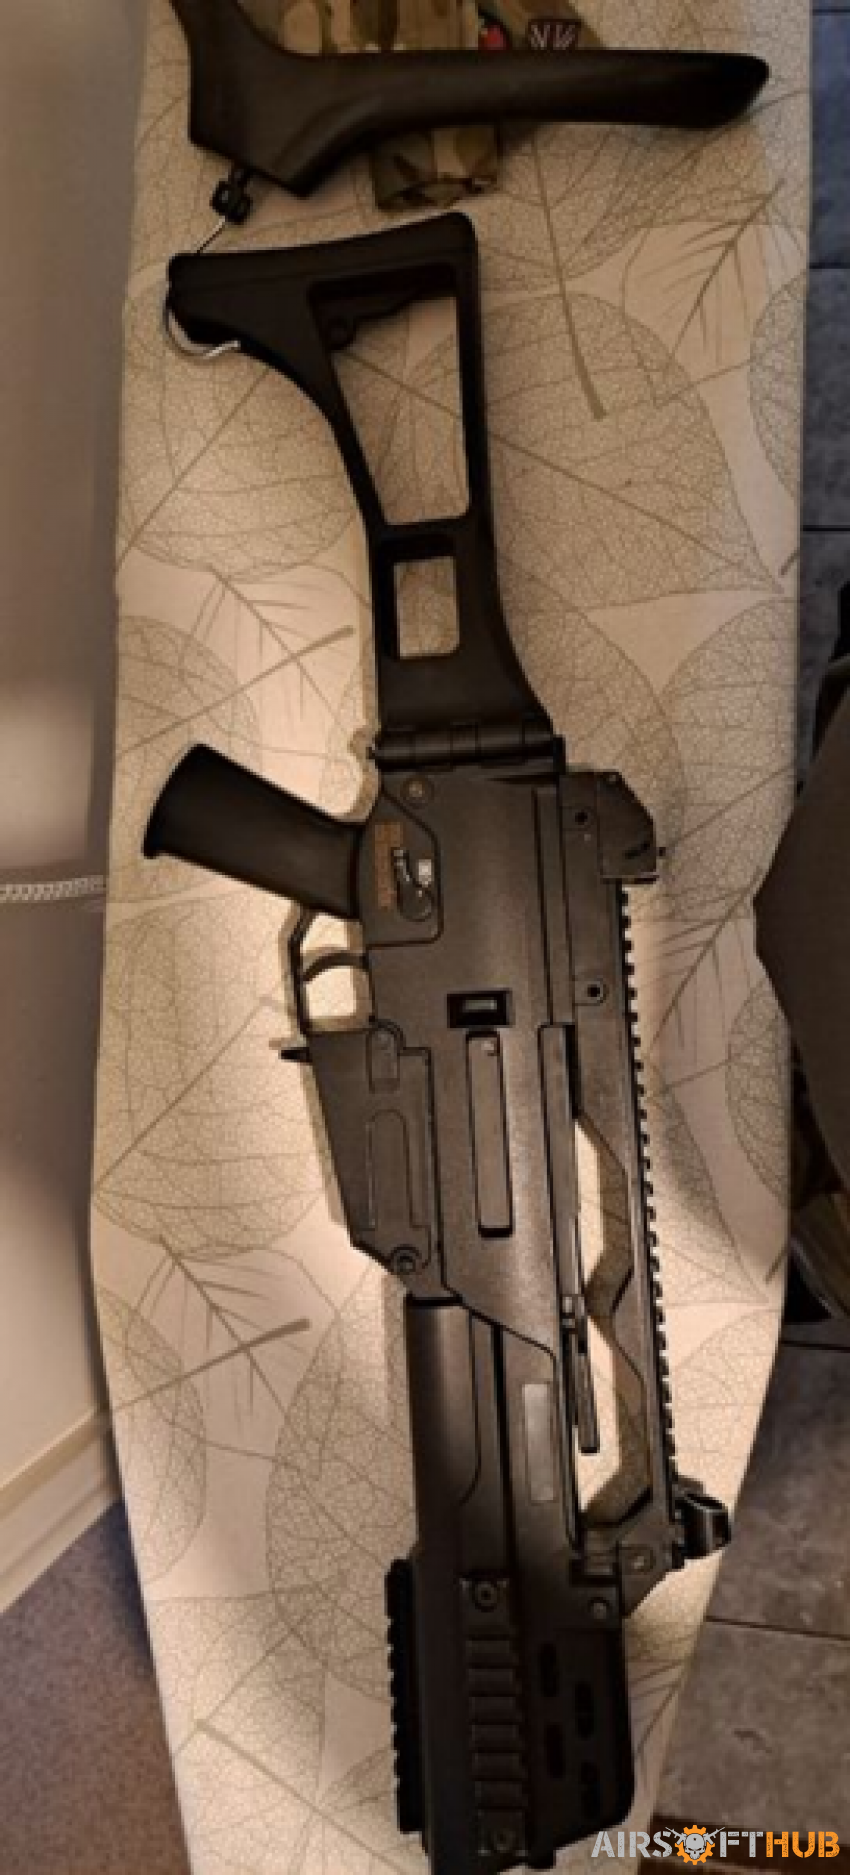 G36c for sale - Used airsoft equipment